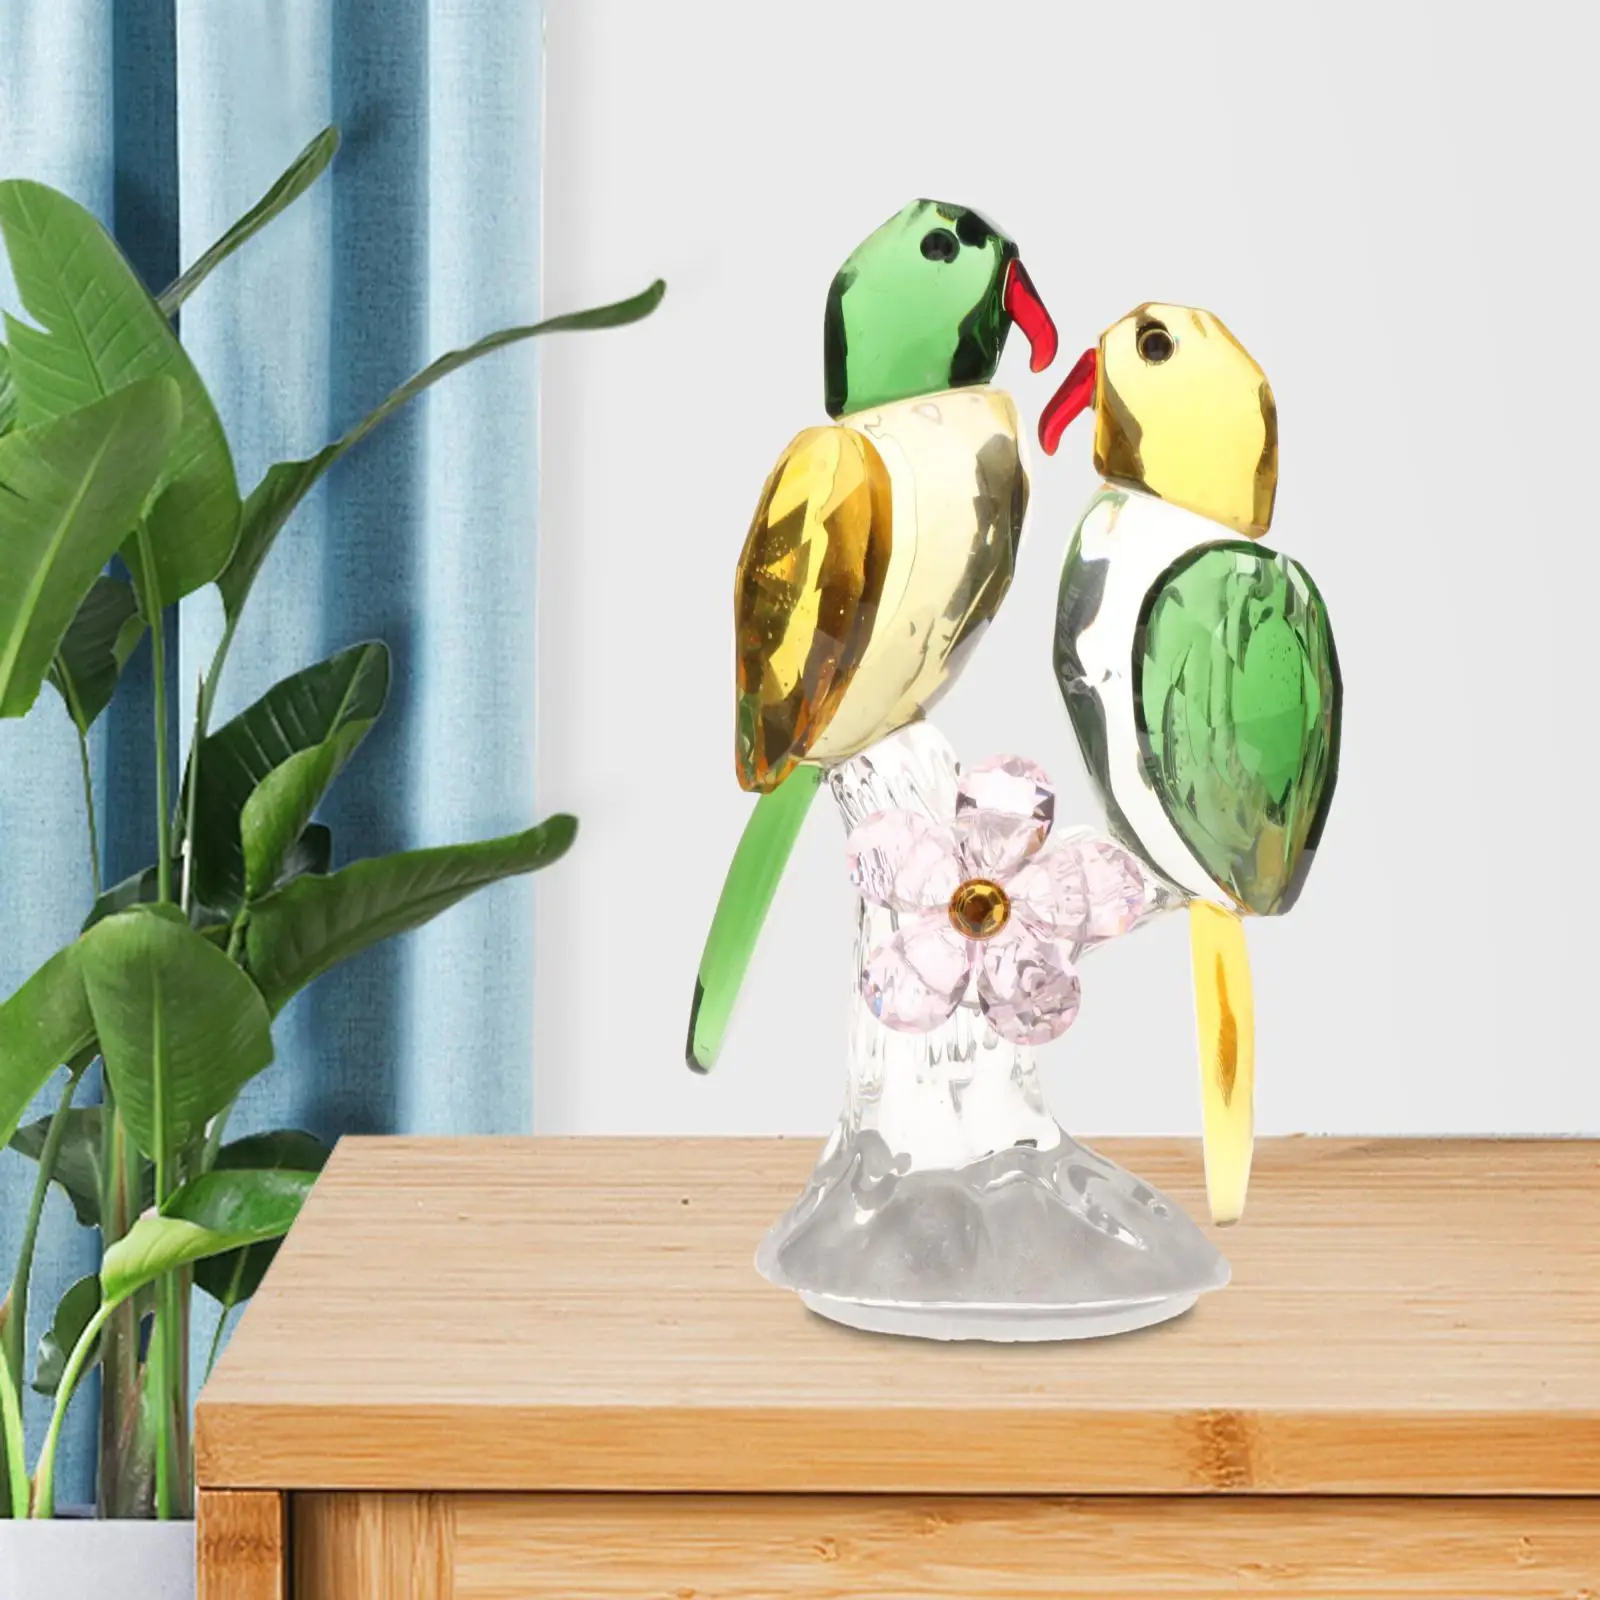 Parrot Statue Bird Figurine Sculpture Animal Craft Ornament for Home Bookcase Living Room Decor Collectable